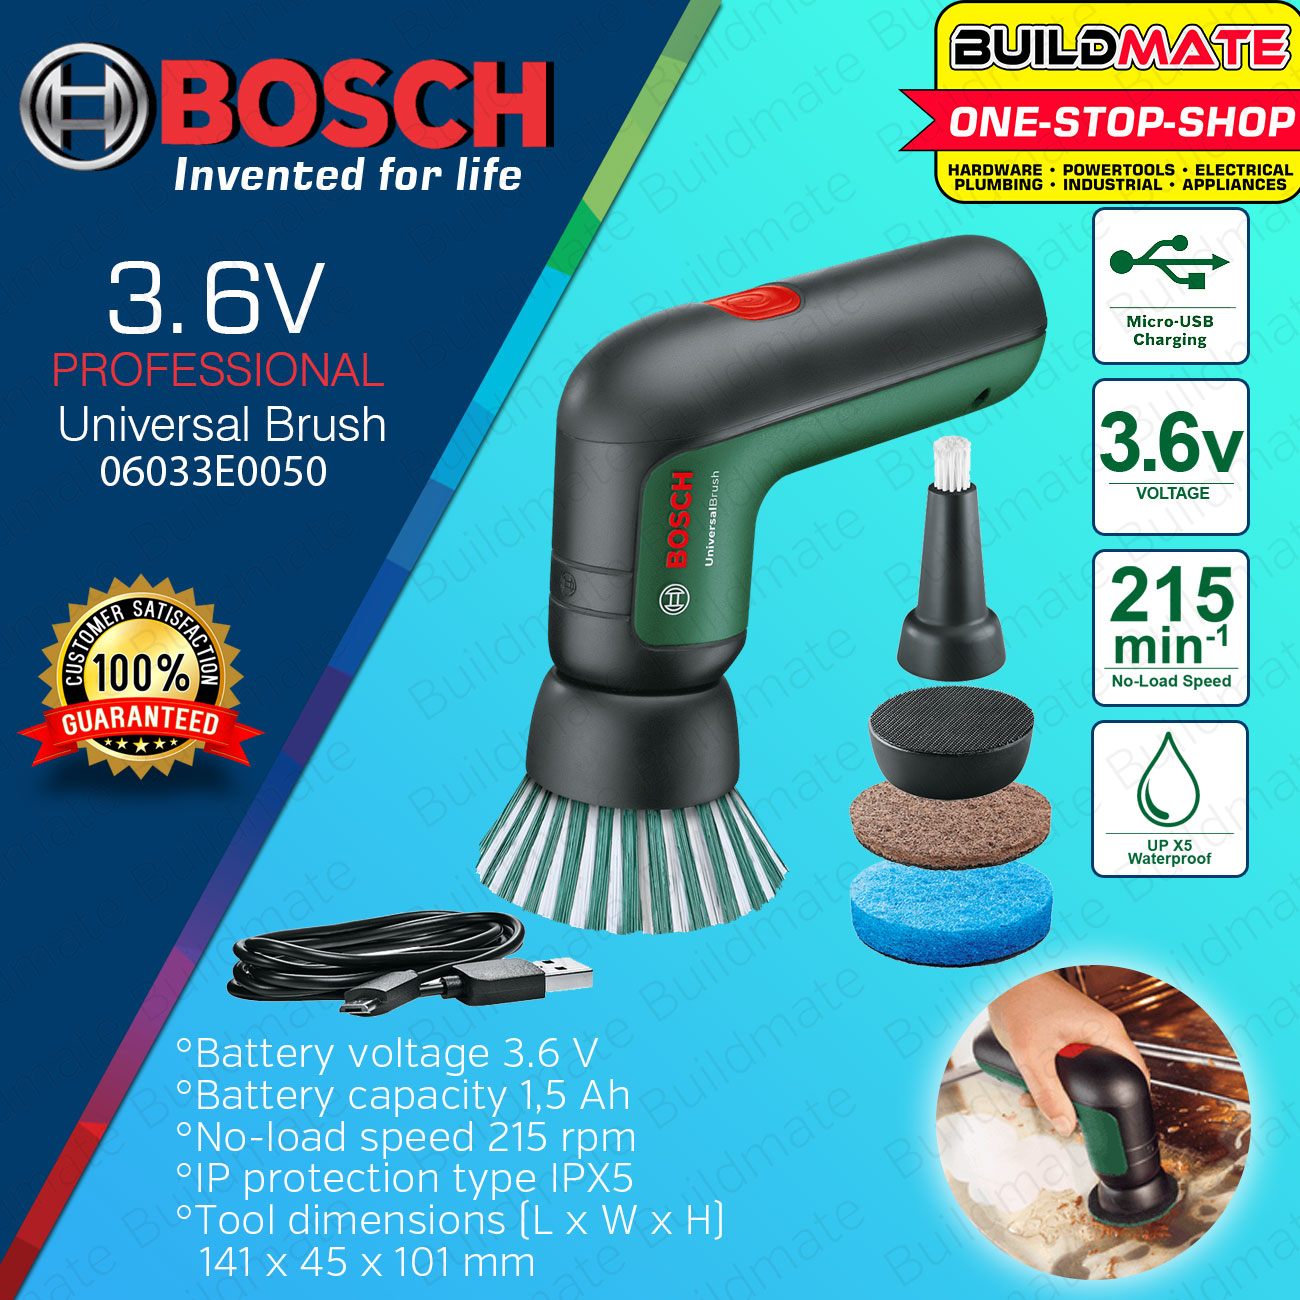 BOSCH Lithium-Ion Cordless 3.6 V Power Scrubber Universal Brush Asia  Wireless 1.5Ah Electric Power Cleaning Brush With 4 Cleaning Attachments &  Micro USB Cable Cleaner Kit 06033E0050